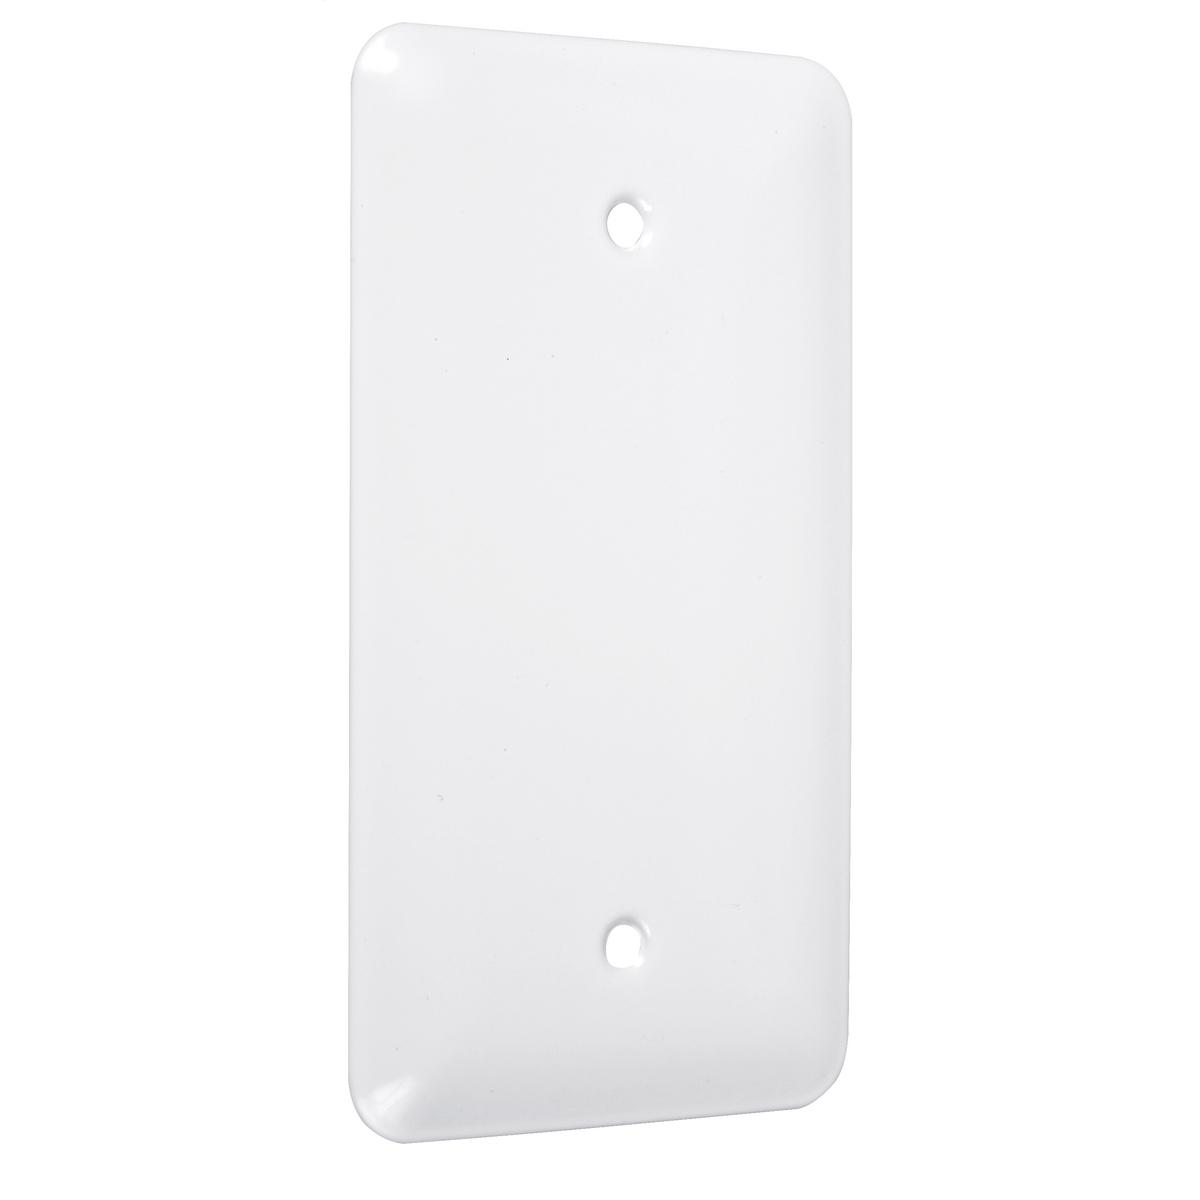 Hubbell WRW-B 1-Gang Metal Wallplate, Princess, Blank, White Smooth  ; Easily primed and painted to match or complement walls. ; Won't bow, crack or distort during installation. ; Premium North American powder coat. ; Includes screw(s) in matching finish.